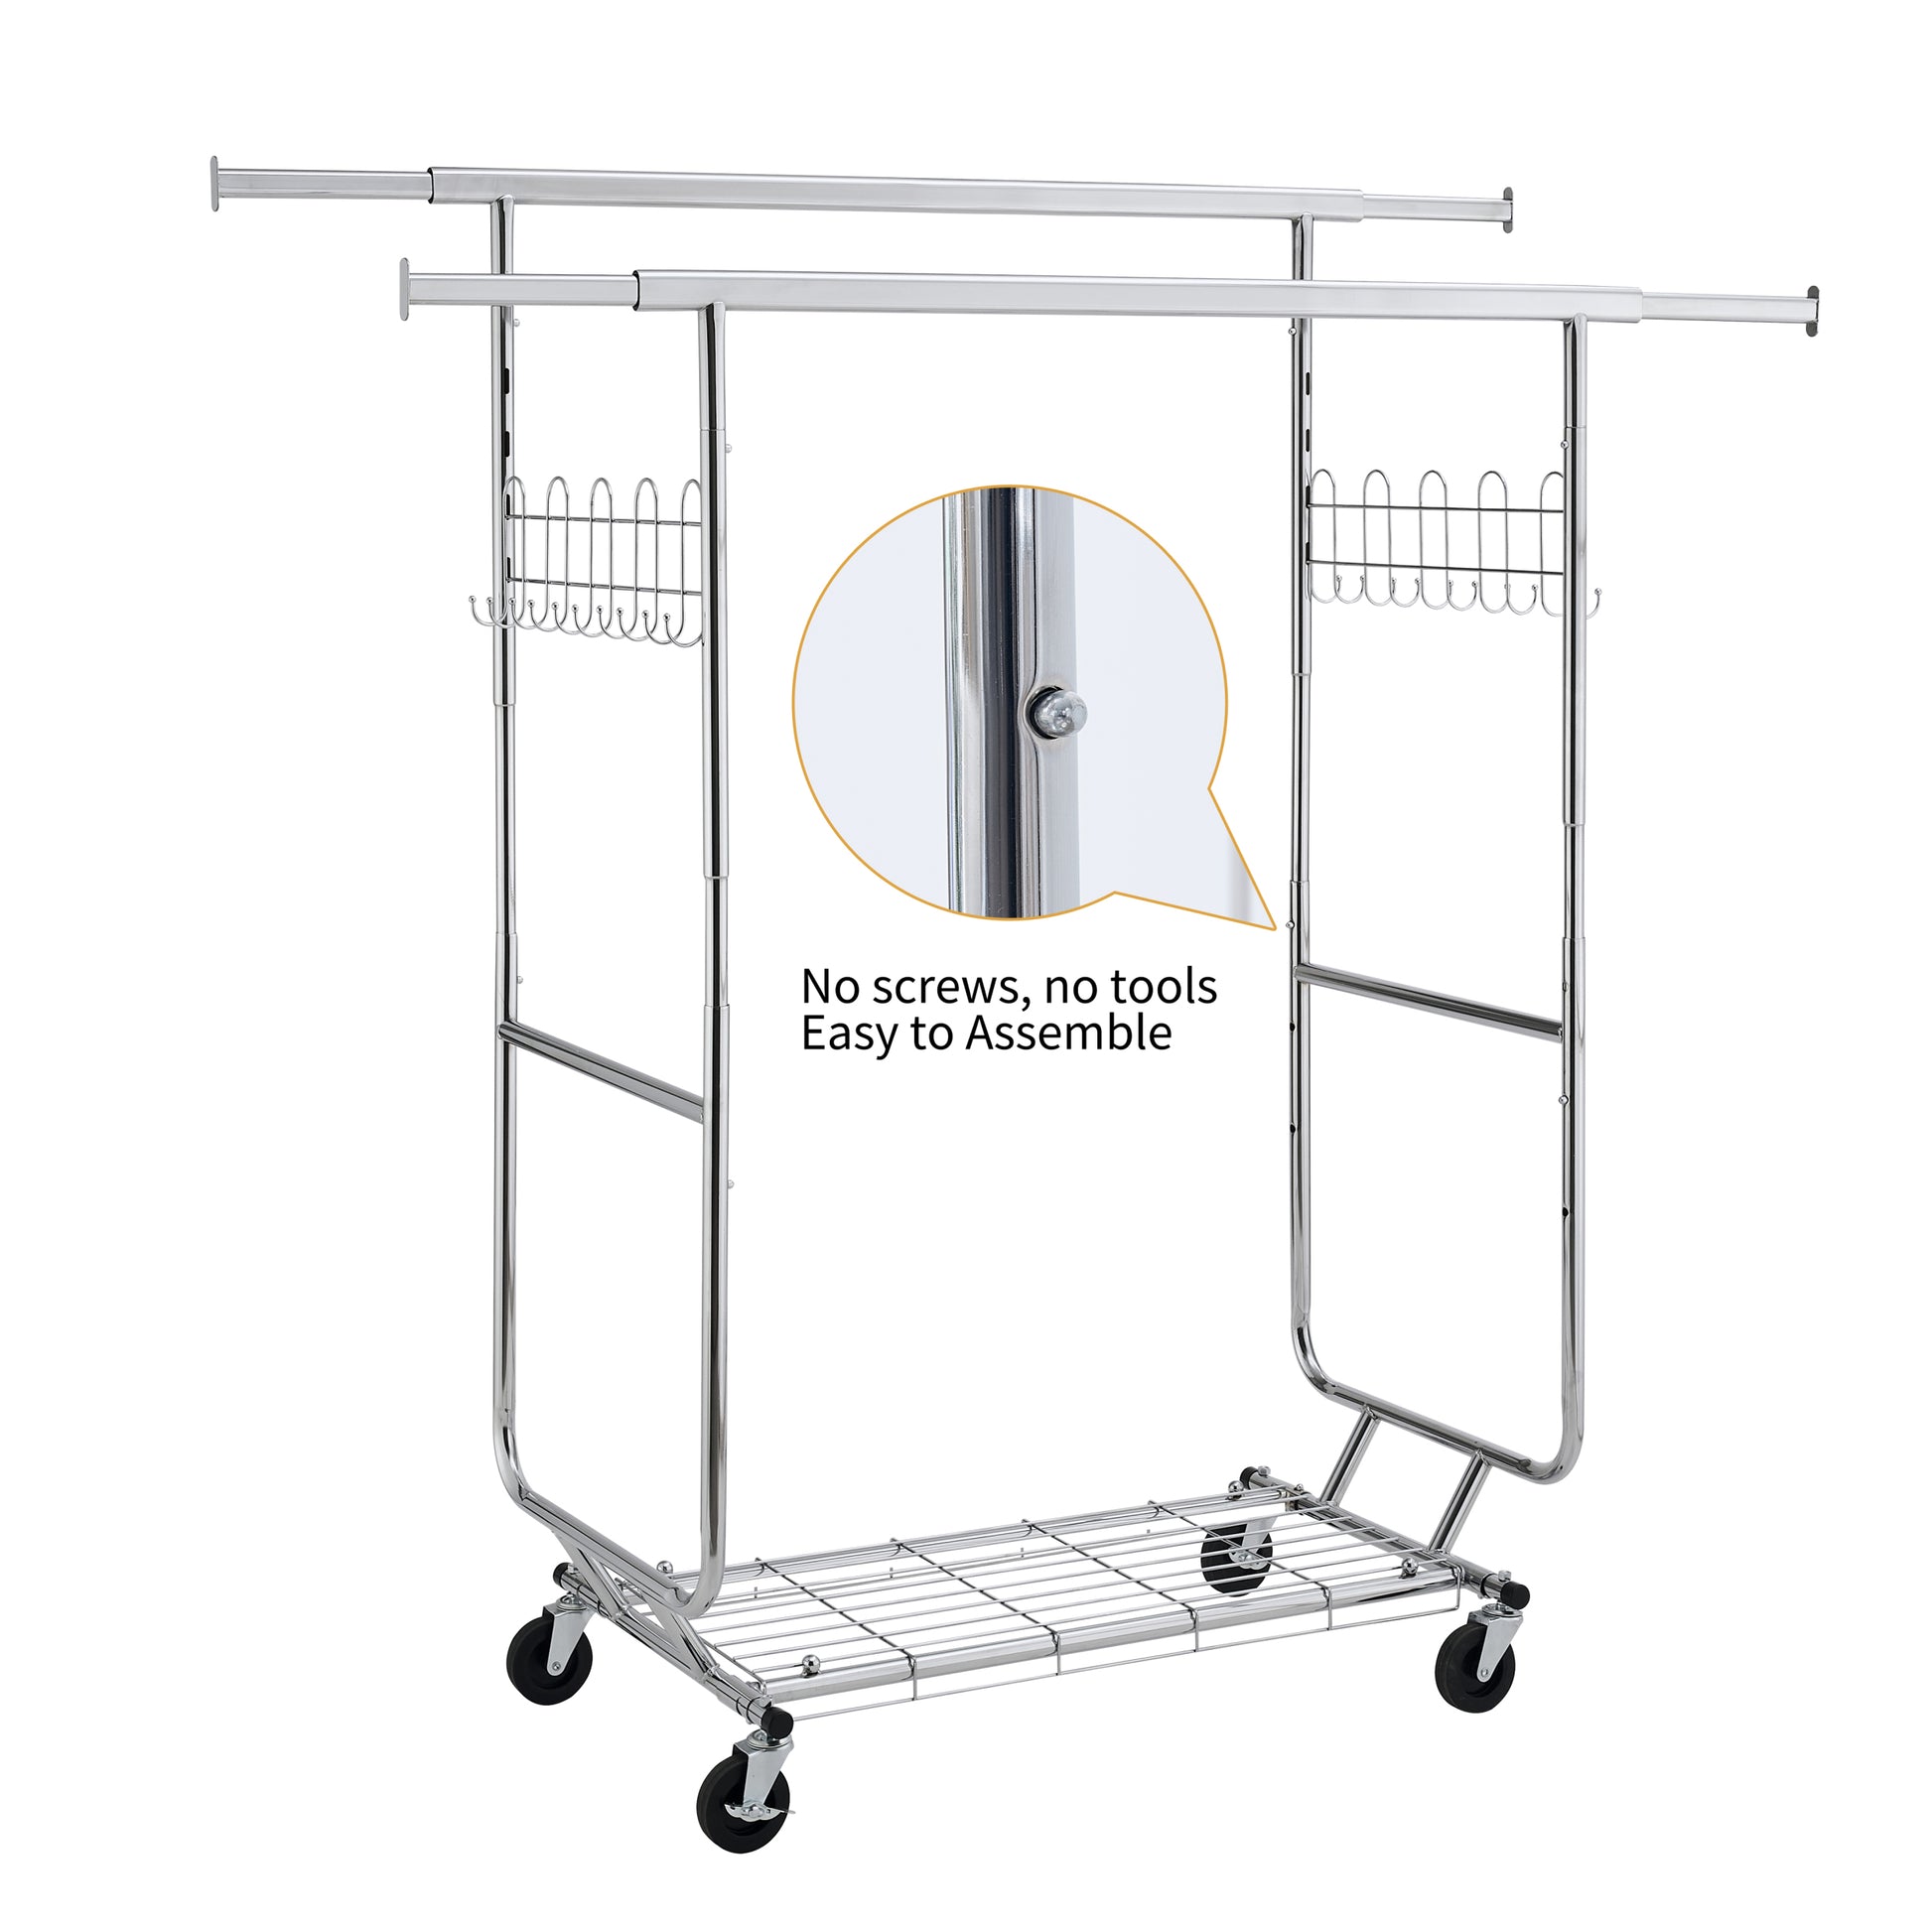 Double Clothing Garment Rack With Shelves